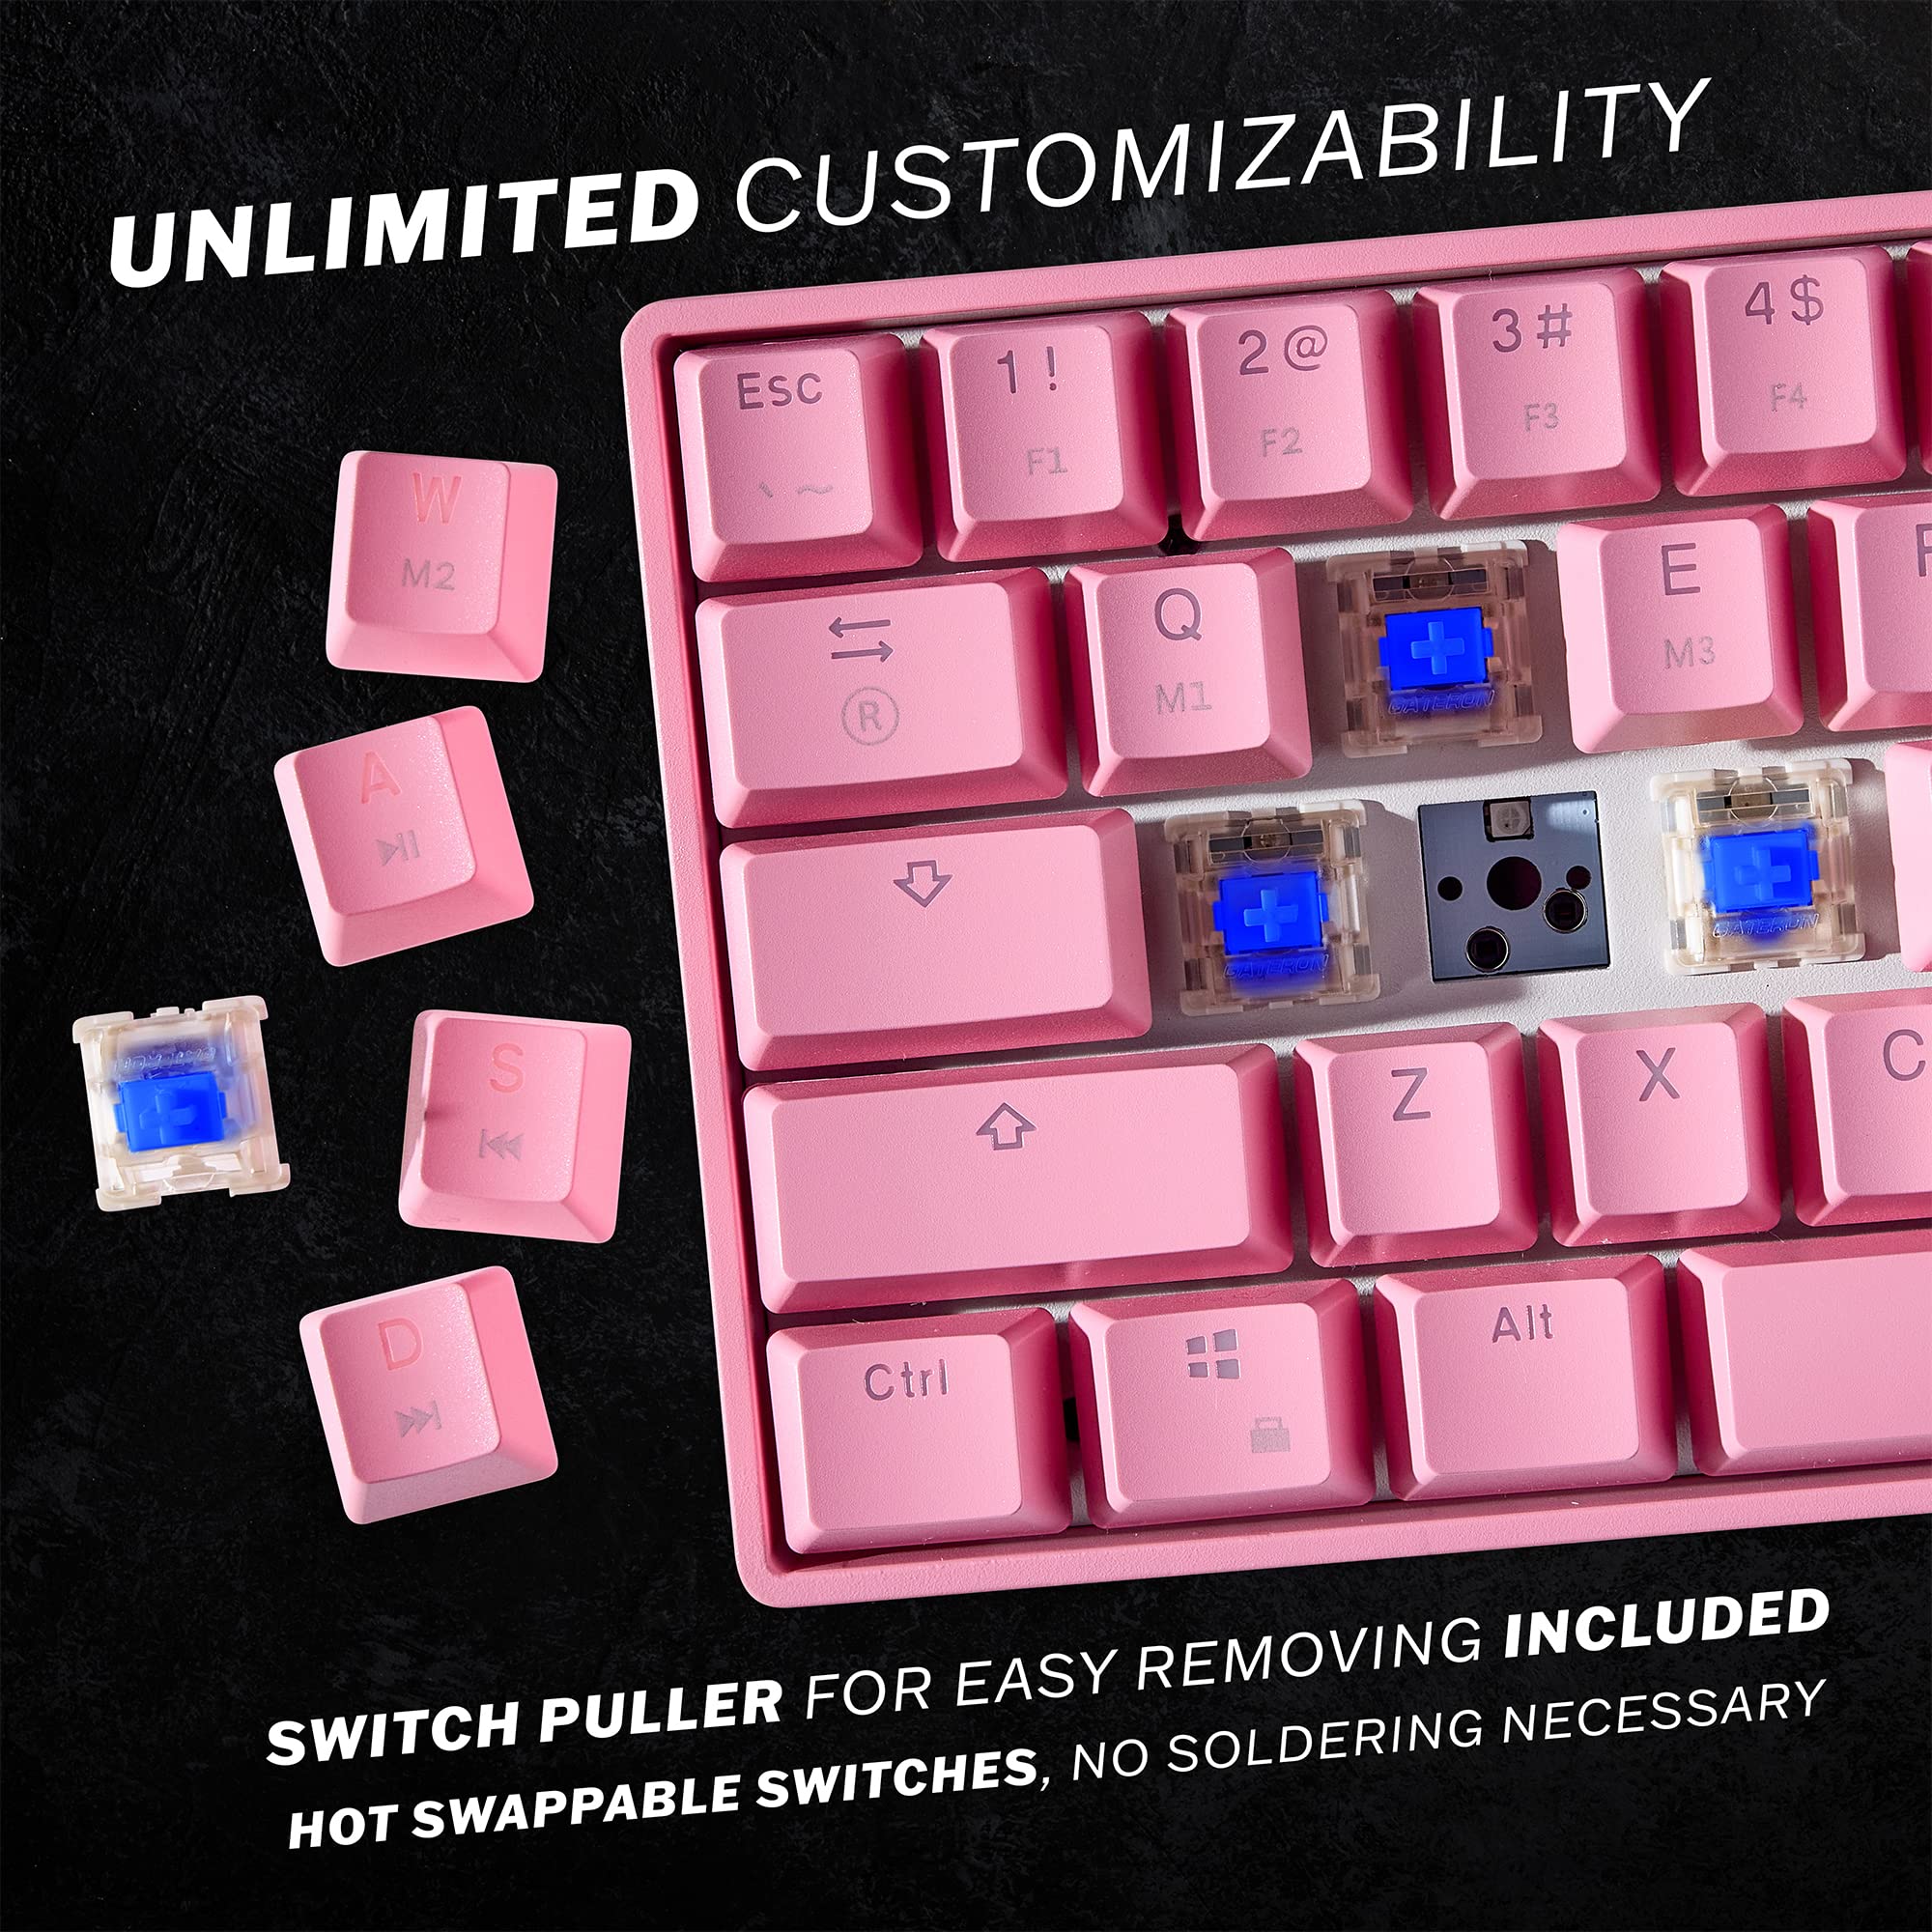 GK61 Mechanical Gaming Keyboard - 61 Keys Multi Color RGB Illuminated LED Backlit Wired Programmable for PC/Mac Gamer (Gateron Optical Silver, Prism Pink)